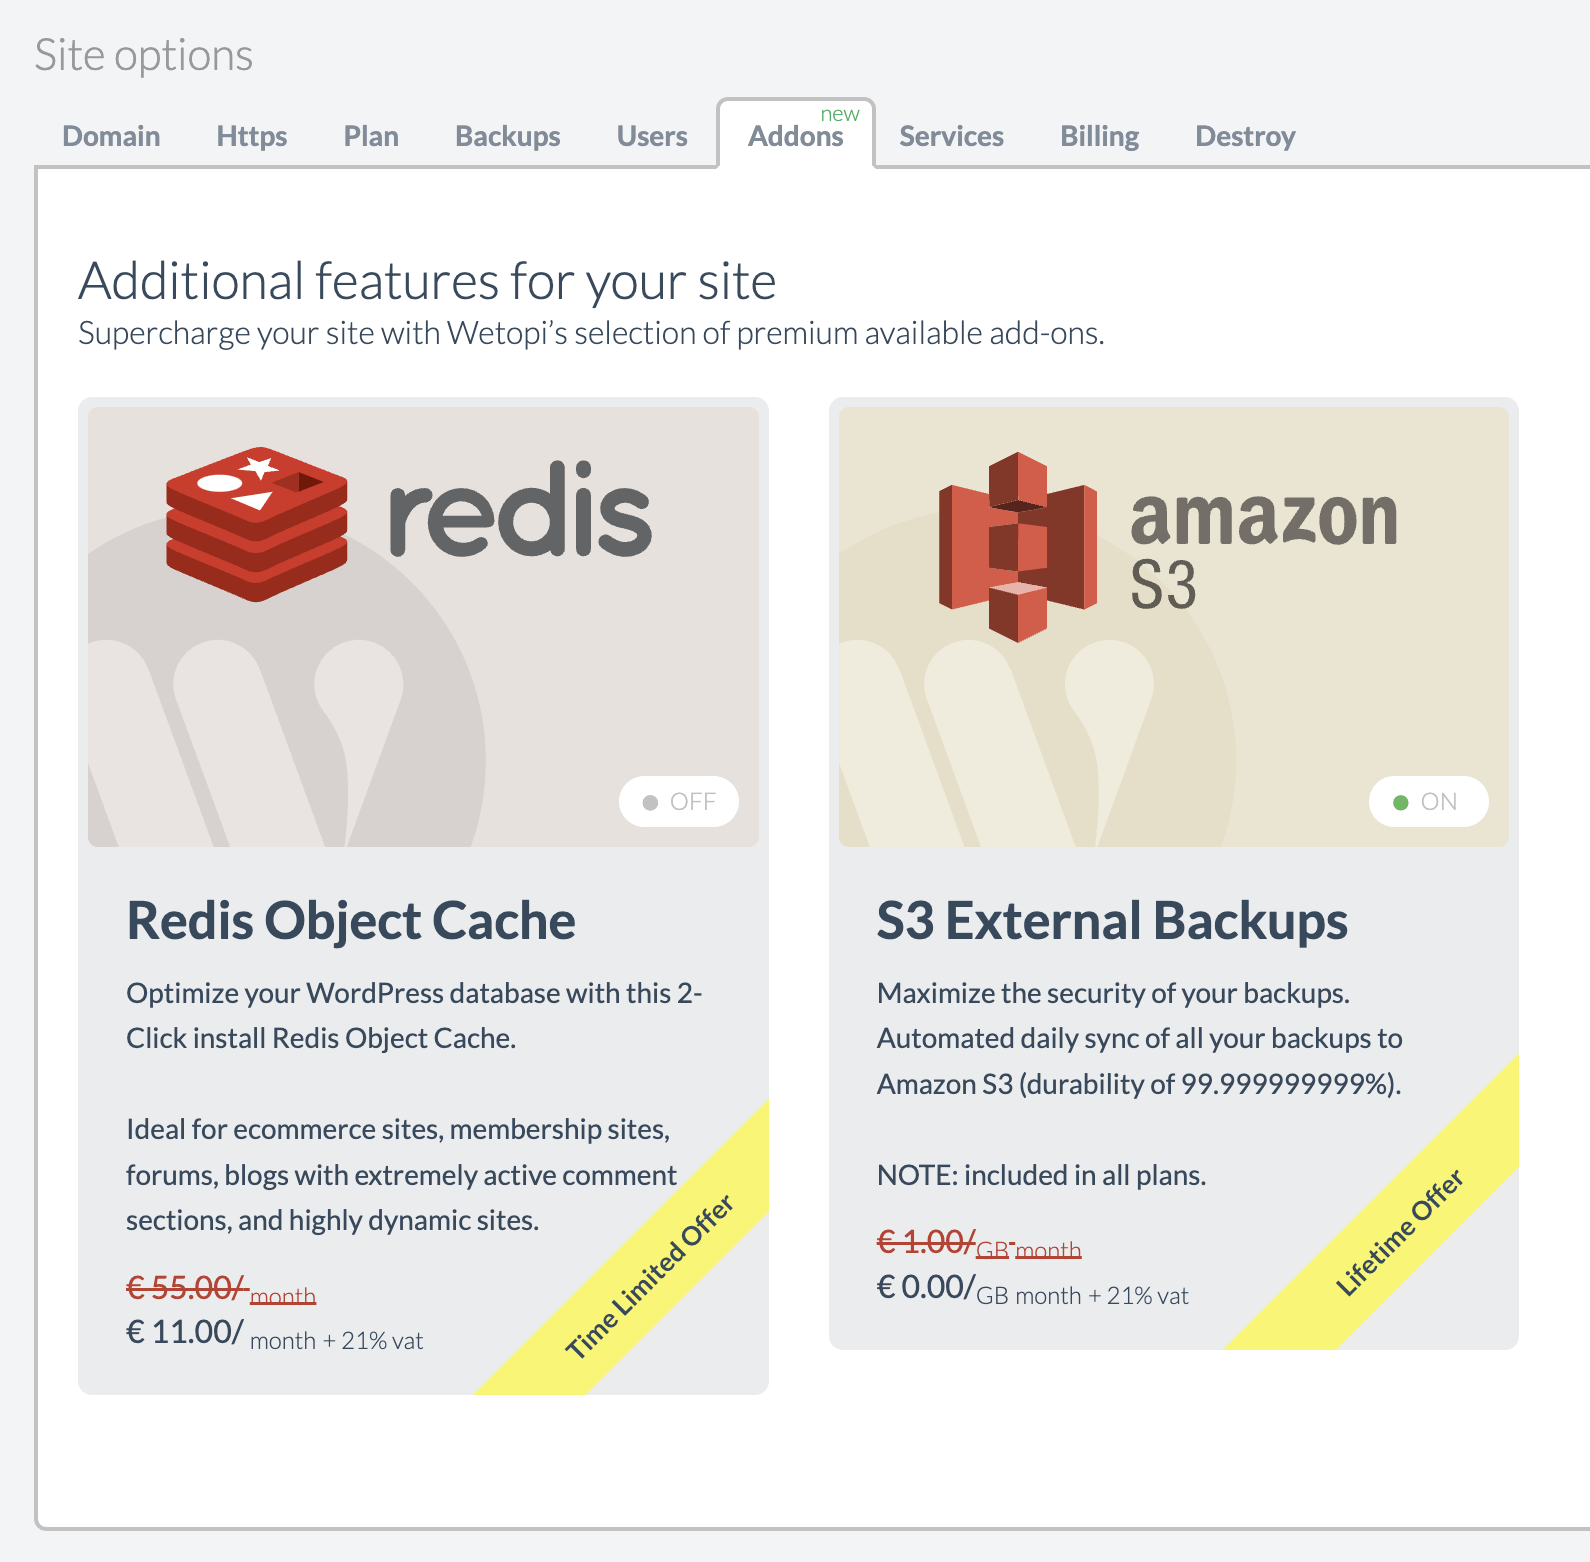 Complementos Wetopi con Redis Object Cache